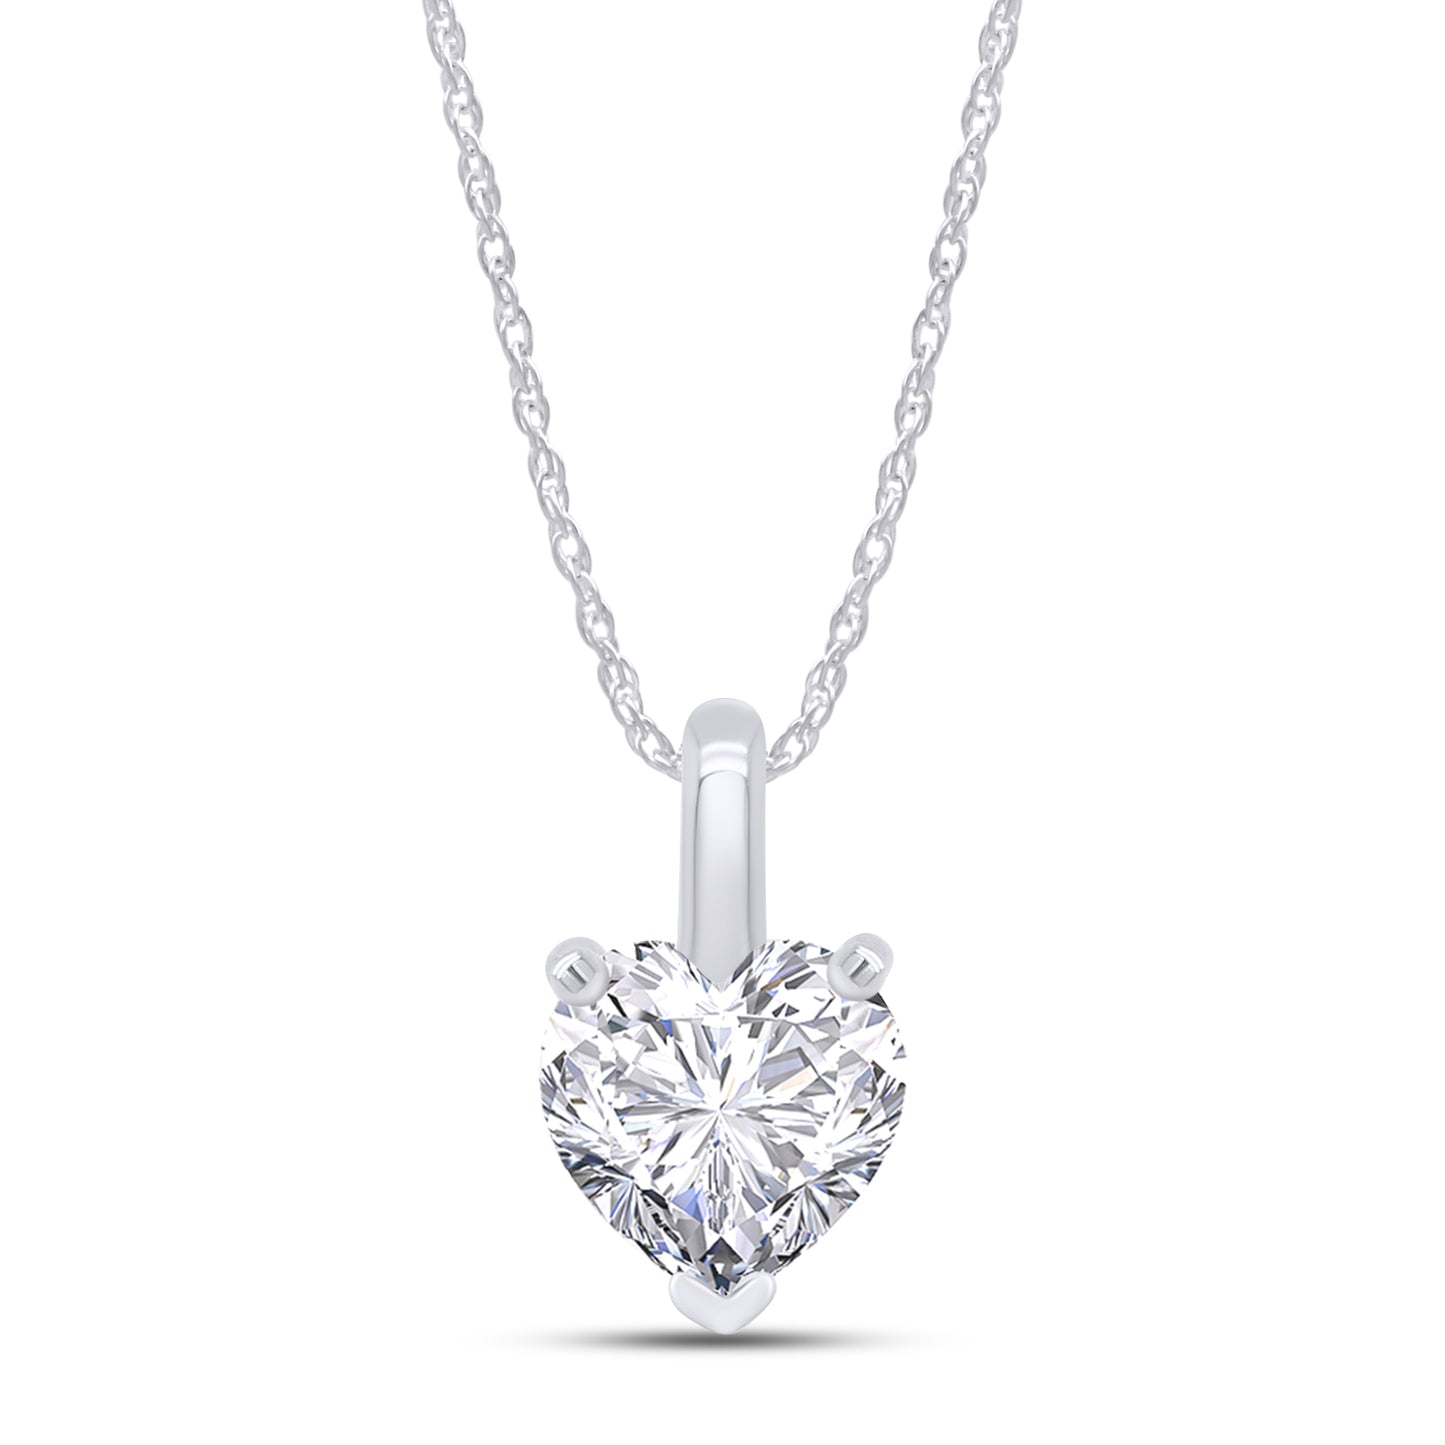 Heart Shape Lab Created Moissanite Diamond Solitaire Pendant Chain Necklace 925 Sterling Silver Jewelry For Women (1.75 Cttw)